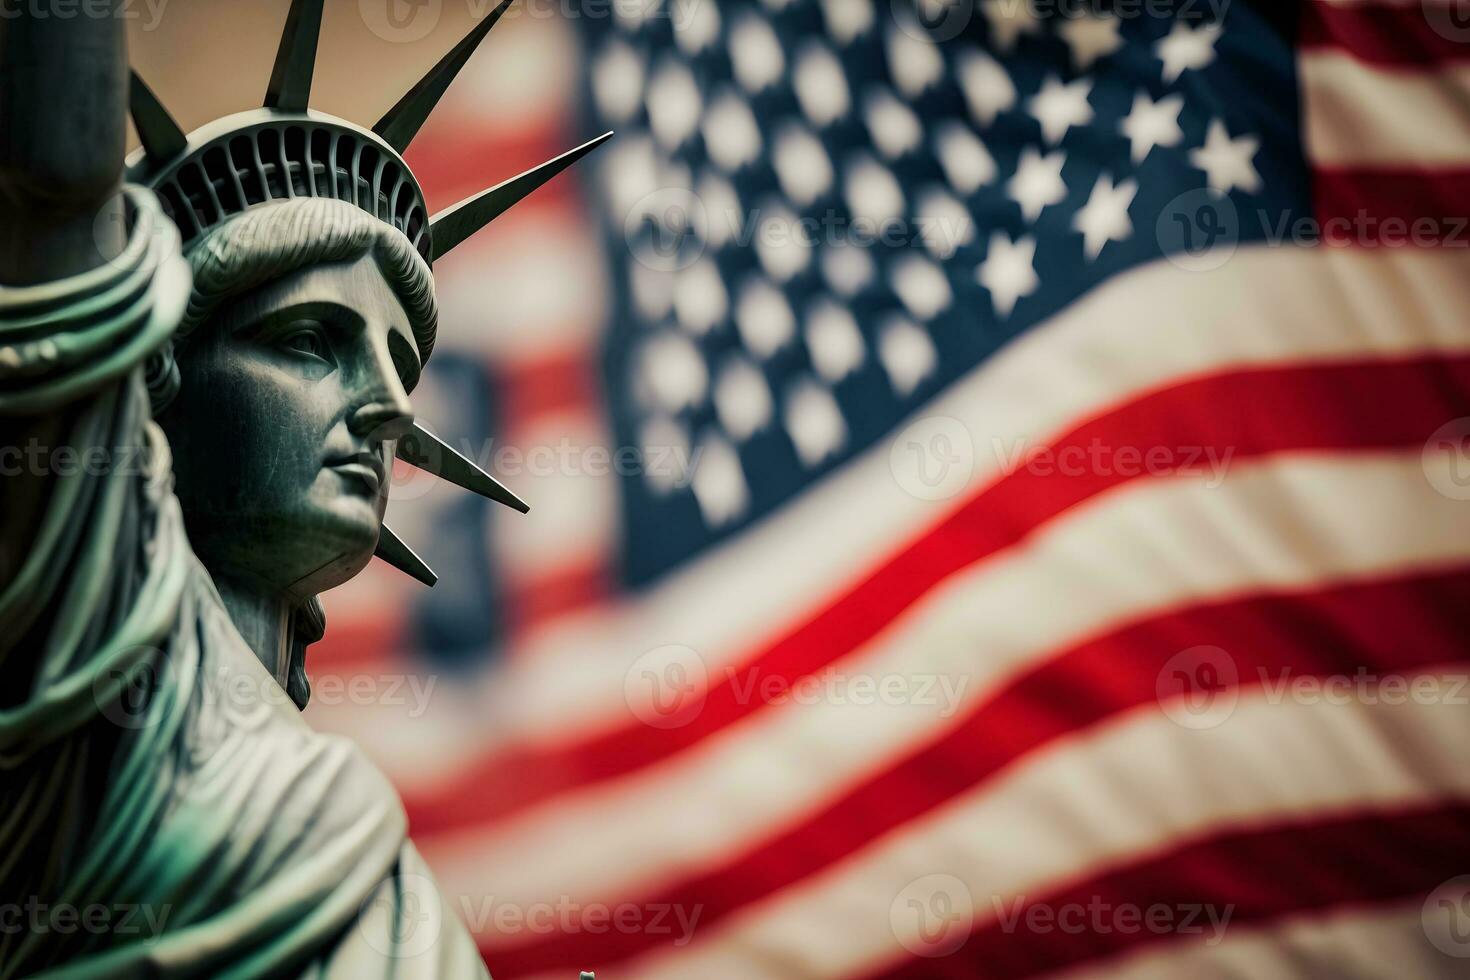 Statue of Liberty on the background of the American flag. Democracy and freedom concept. Neural network AI generated art photo